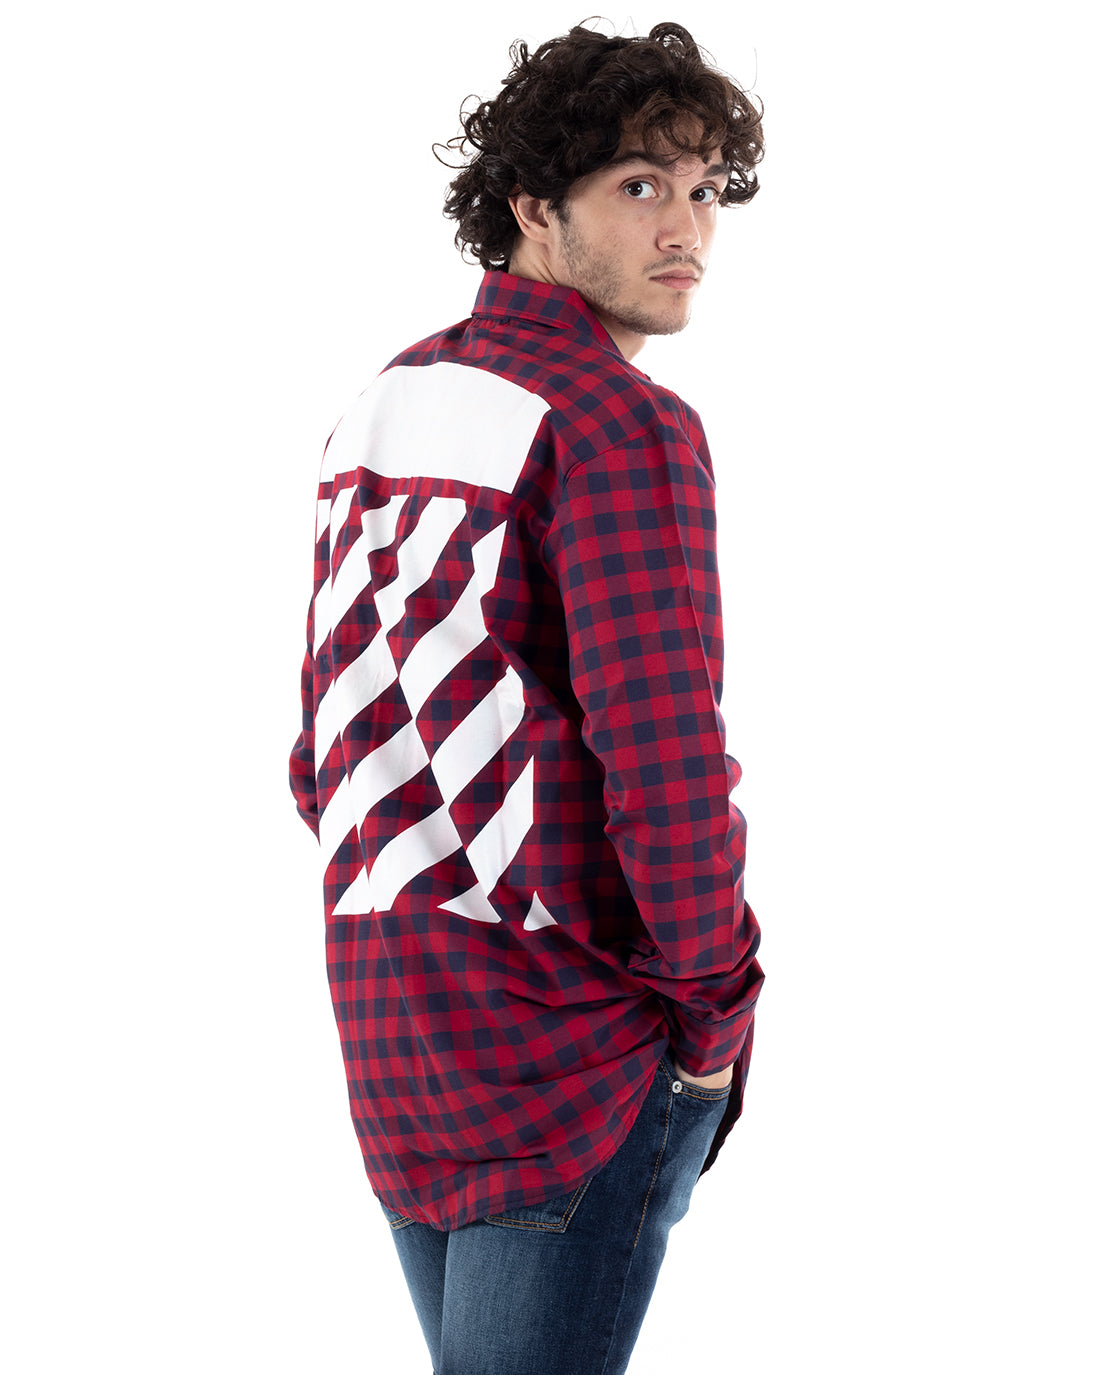 Shirt With Collar Long Sleeve Plaid Checked Shirt Red Blue GIOSAL-C2652A